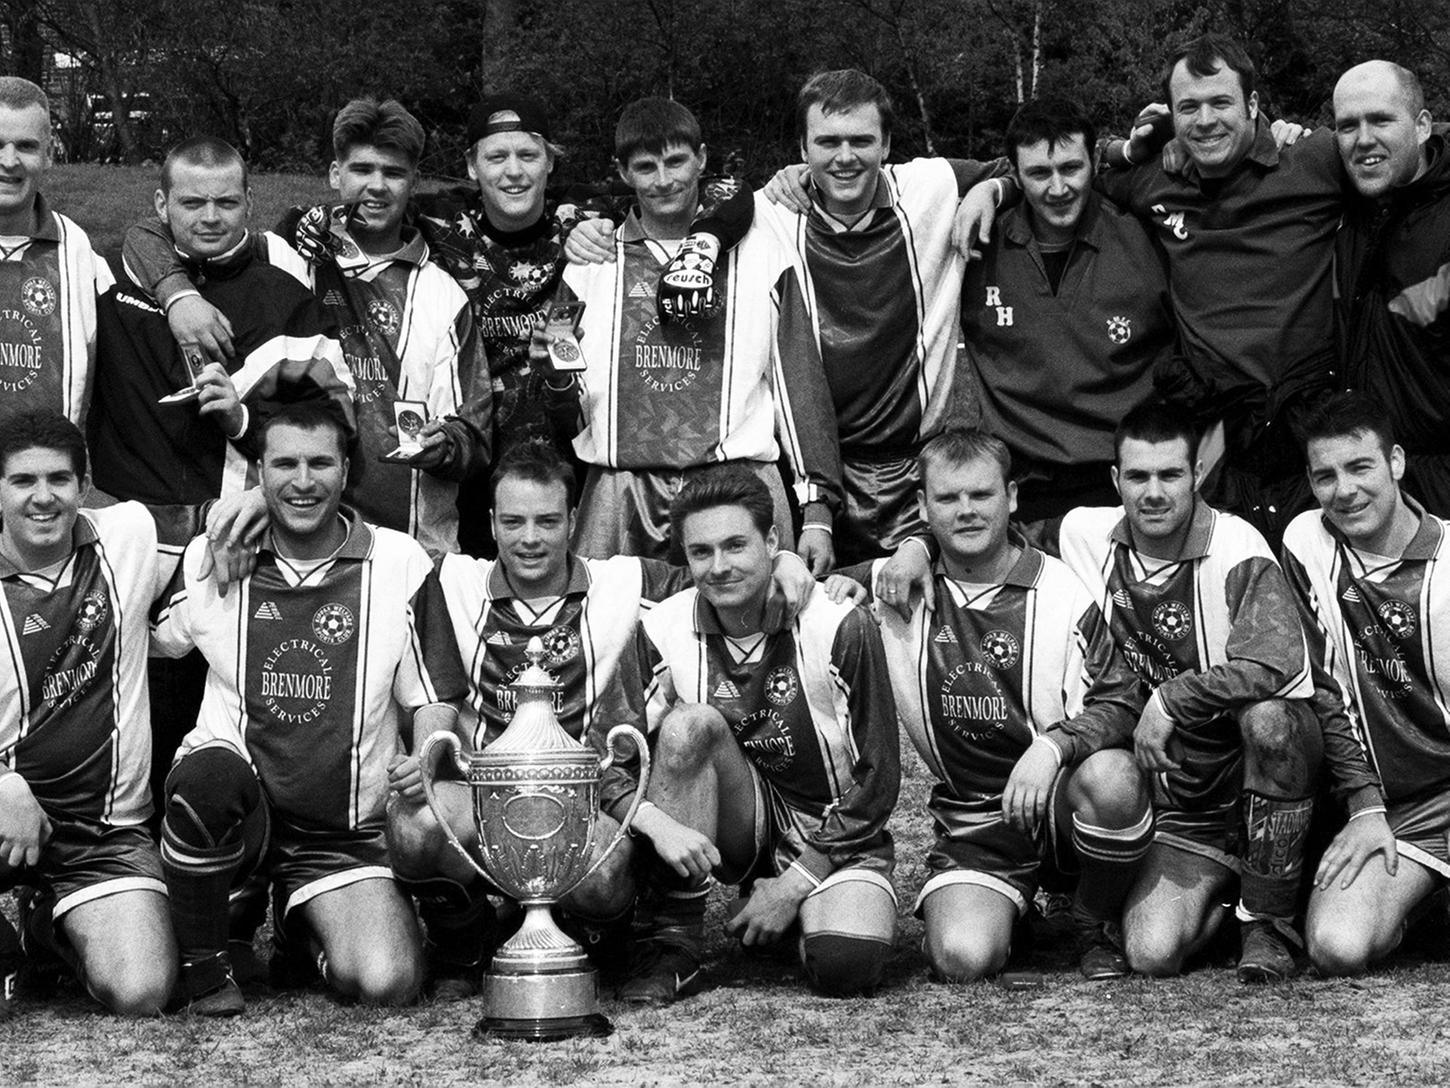 Kippax Welfare posed for a commemorative picture after winning the Leeds Sunday League Raftery Cup Final in April 1998